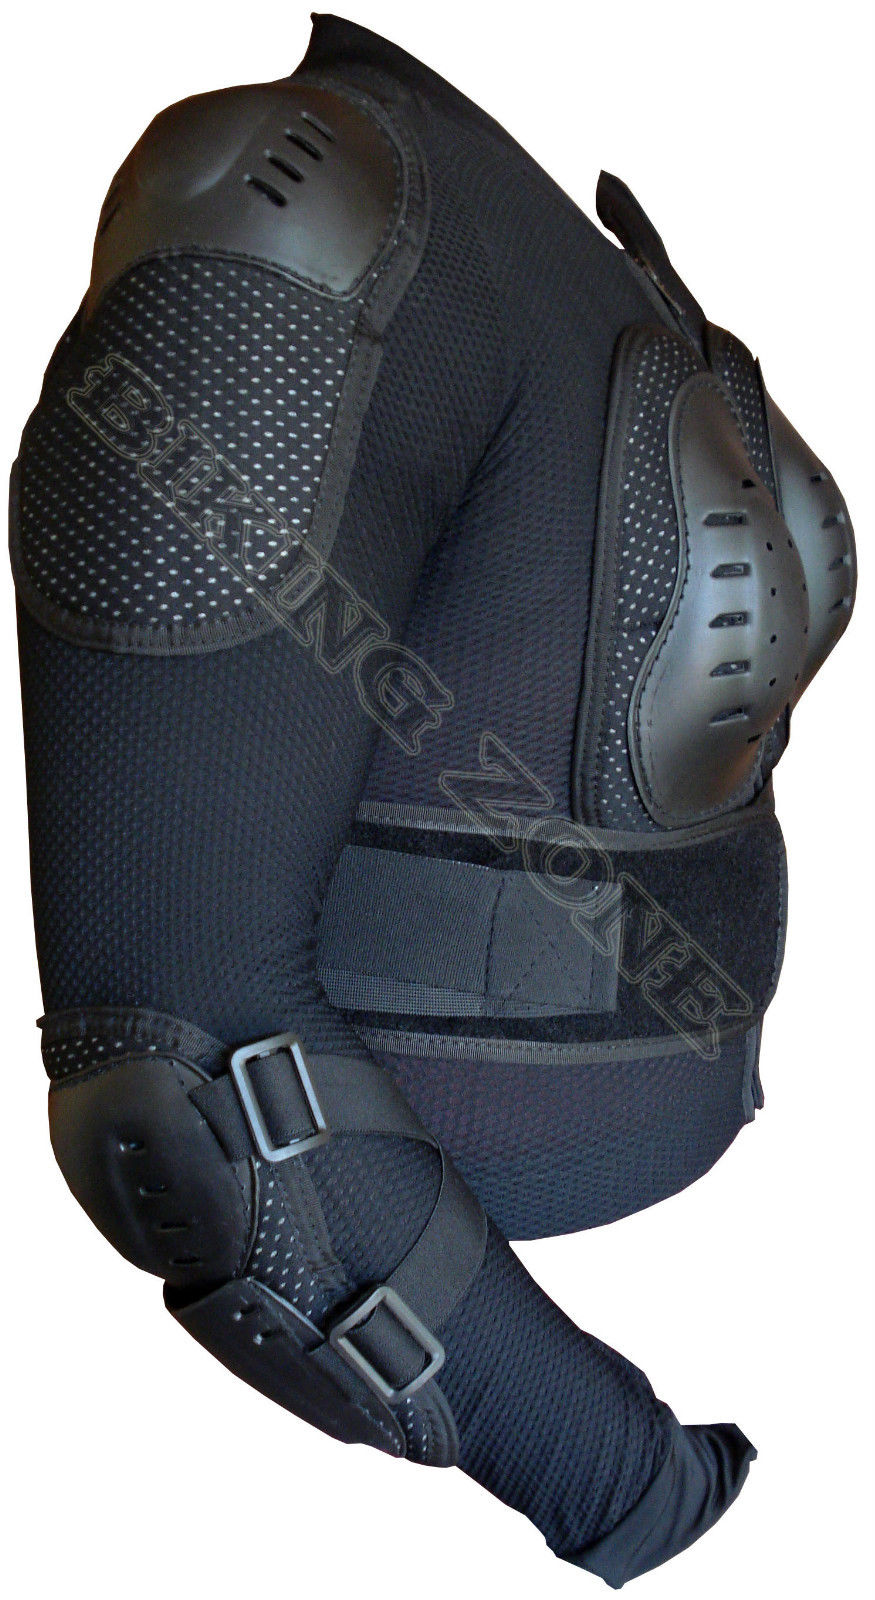 LADIES SPINE CHEST GUARD BODY ARMOUR